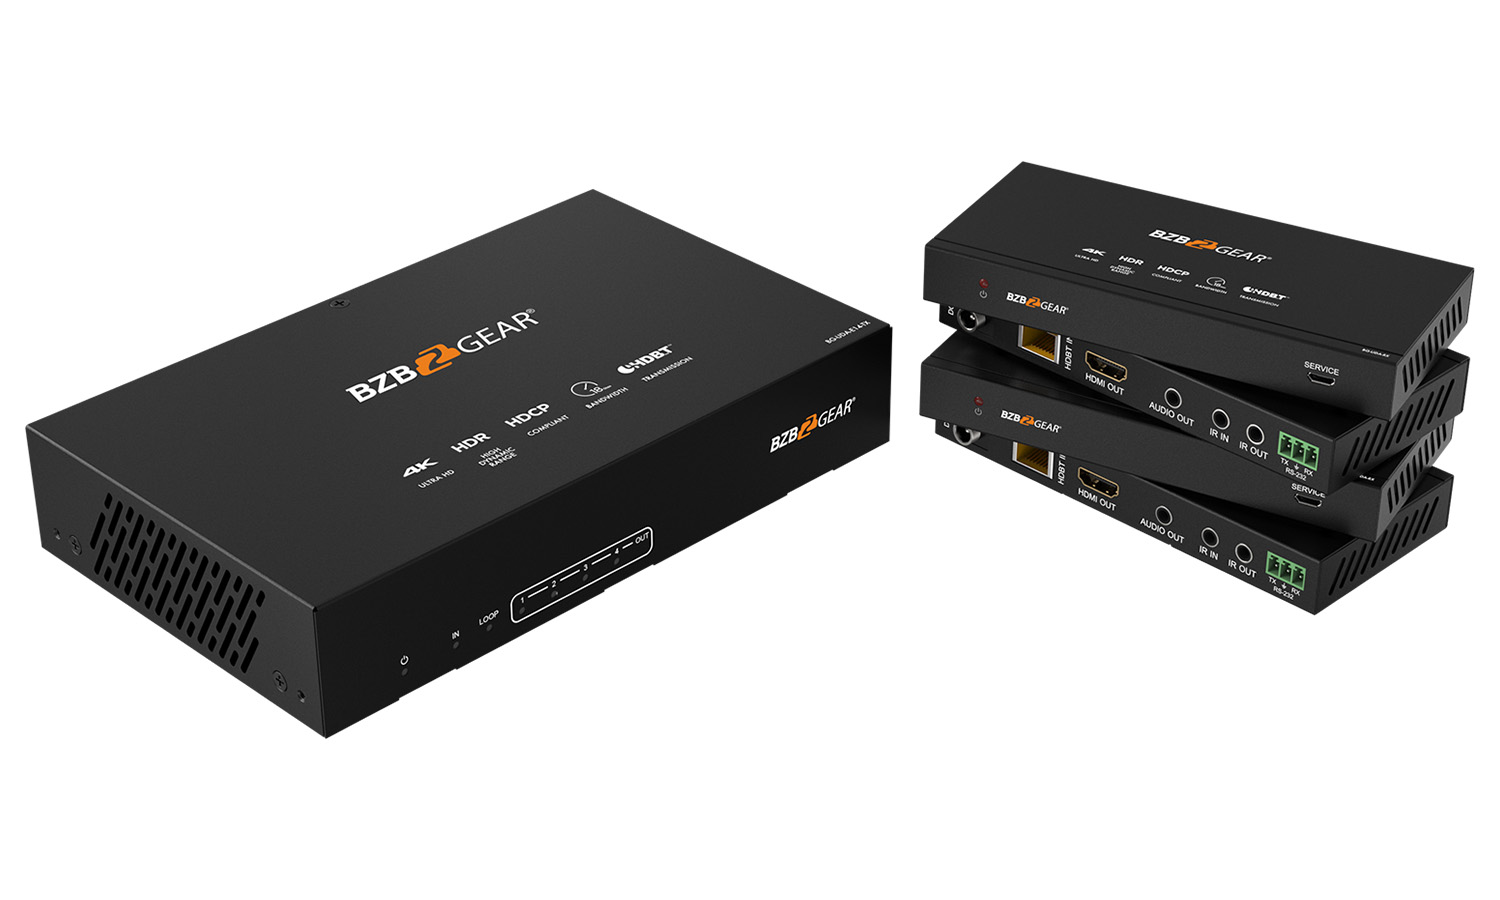 BG-UDA-E14 1X4 4K 18Gbps UHD HDMI HDBaset Splitter/Distribution Amplifier over Single Category 5e/6/7 Cable (Kit, Includes 4x RX) by BZBGEAR